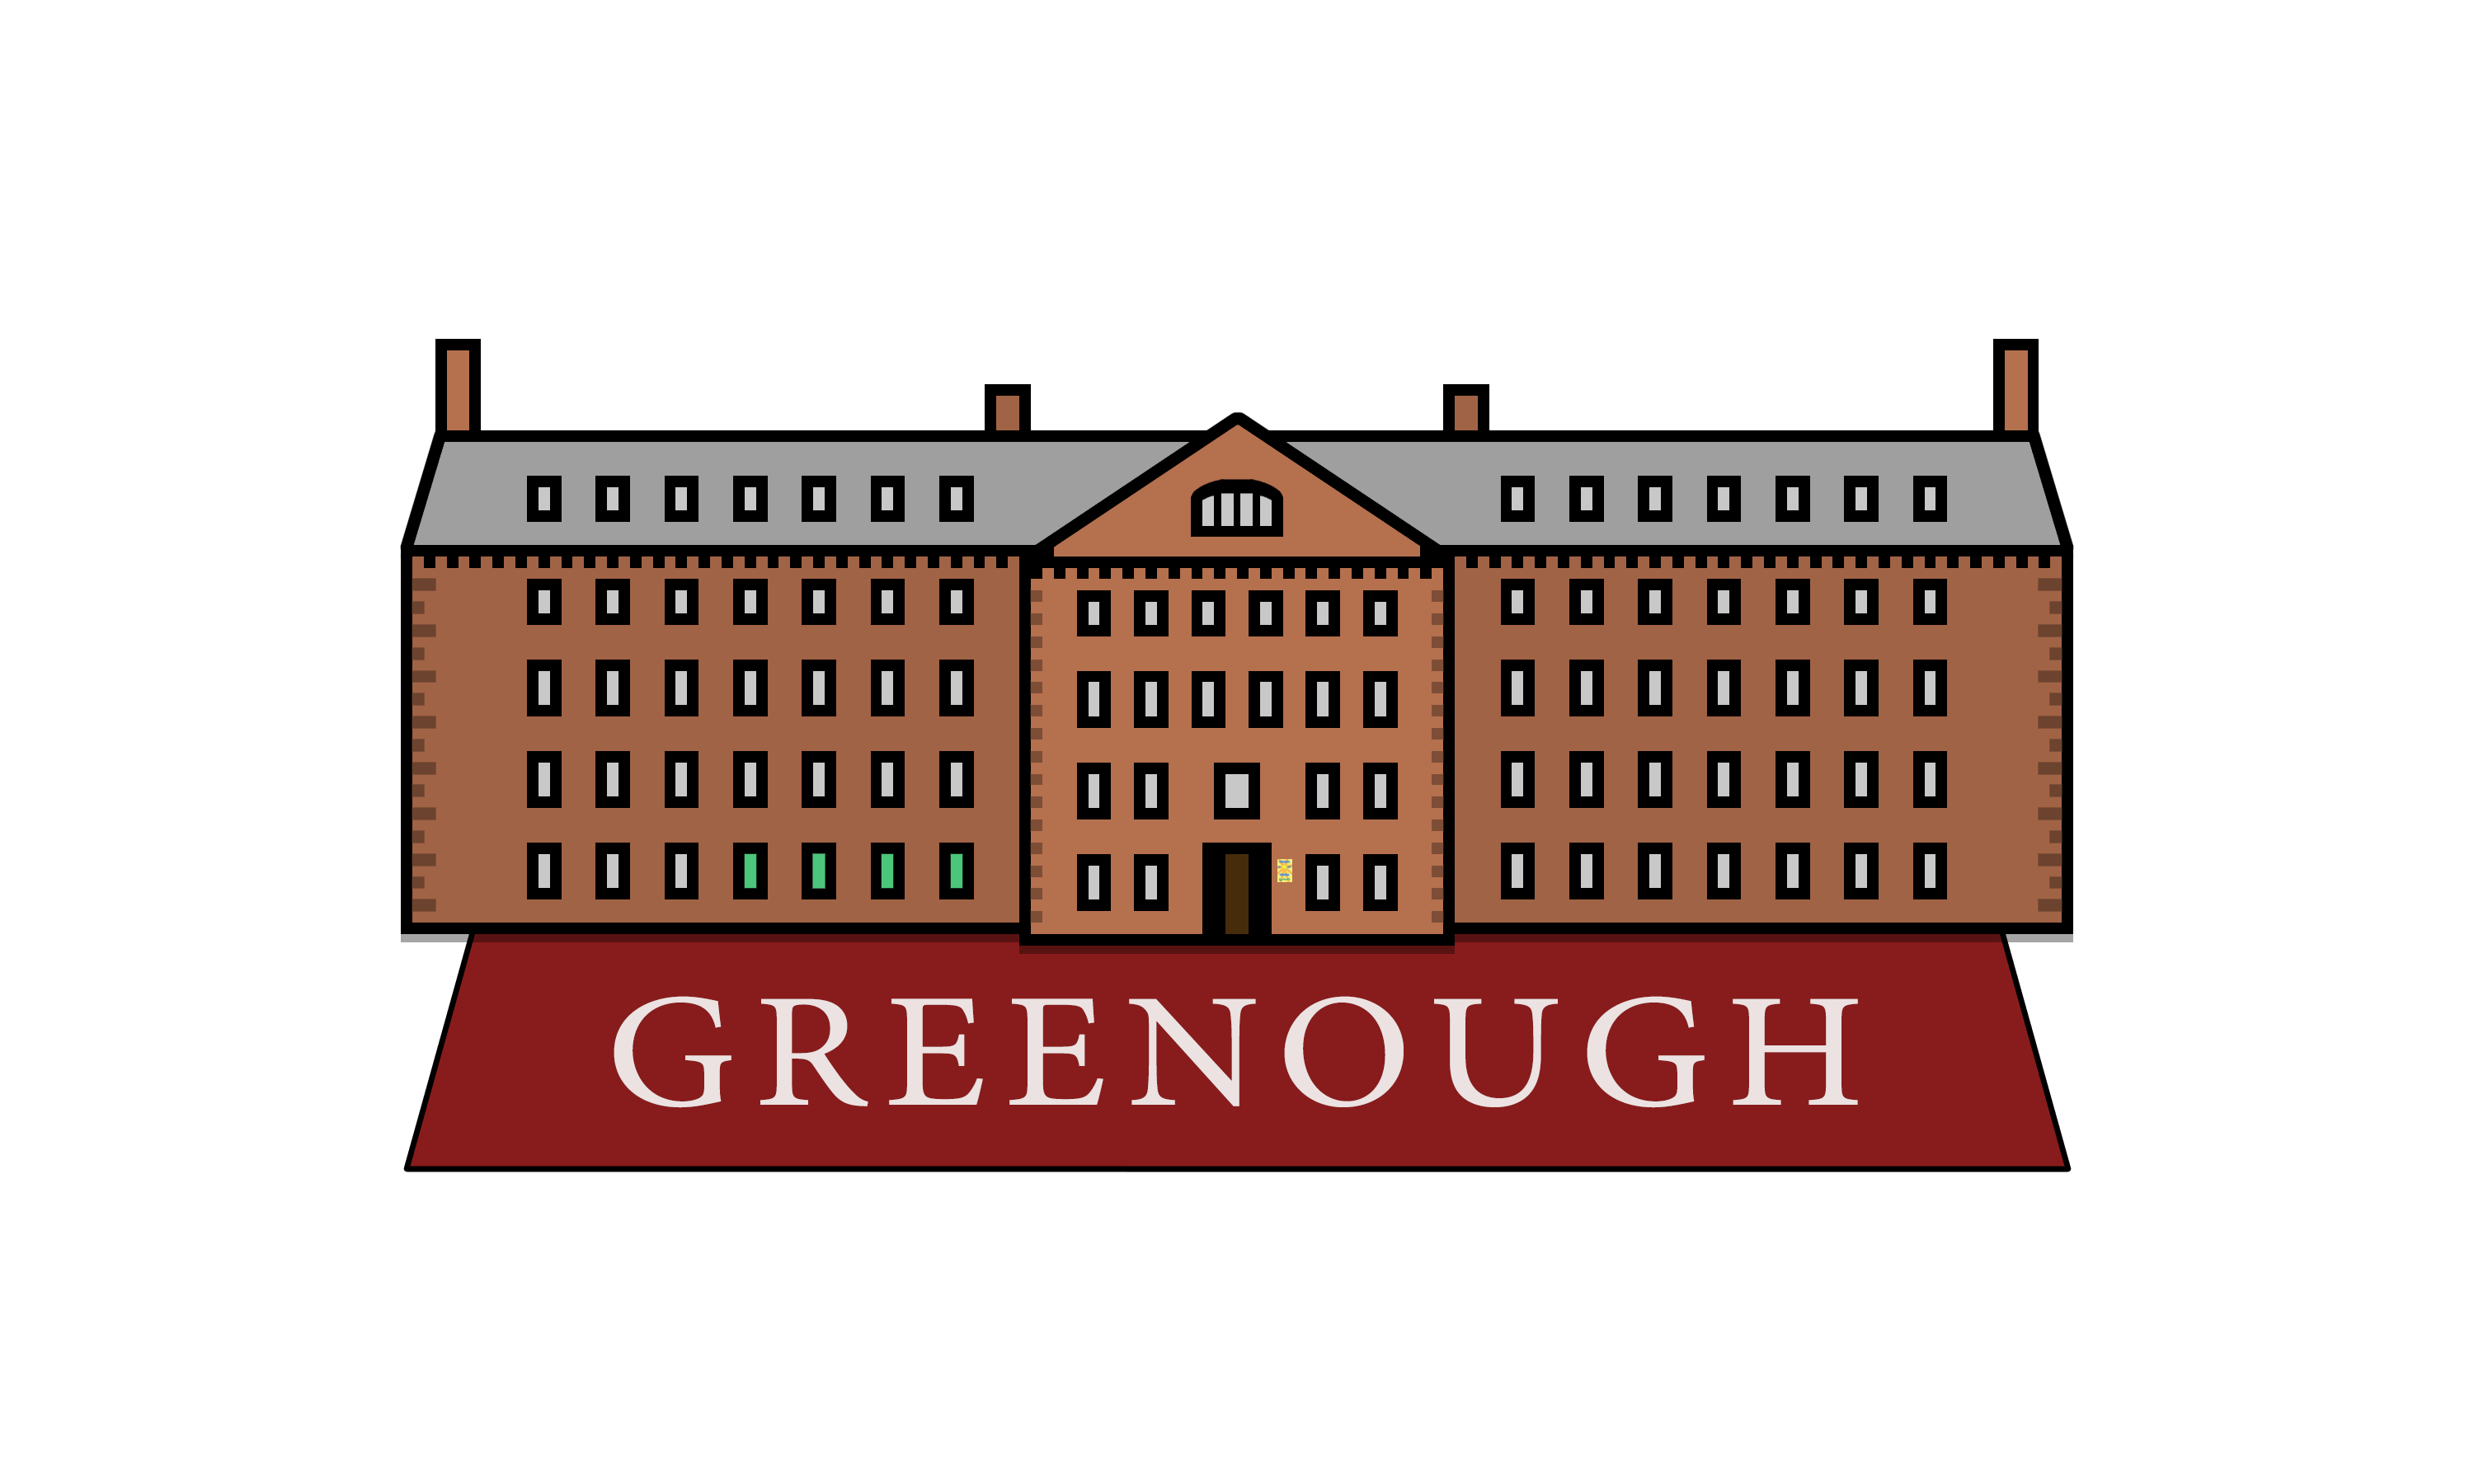 An icon of Greenough House at UMass